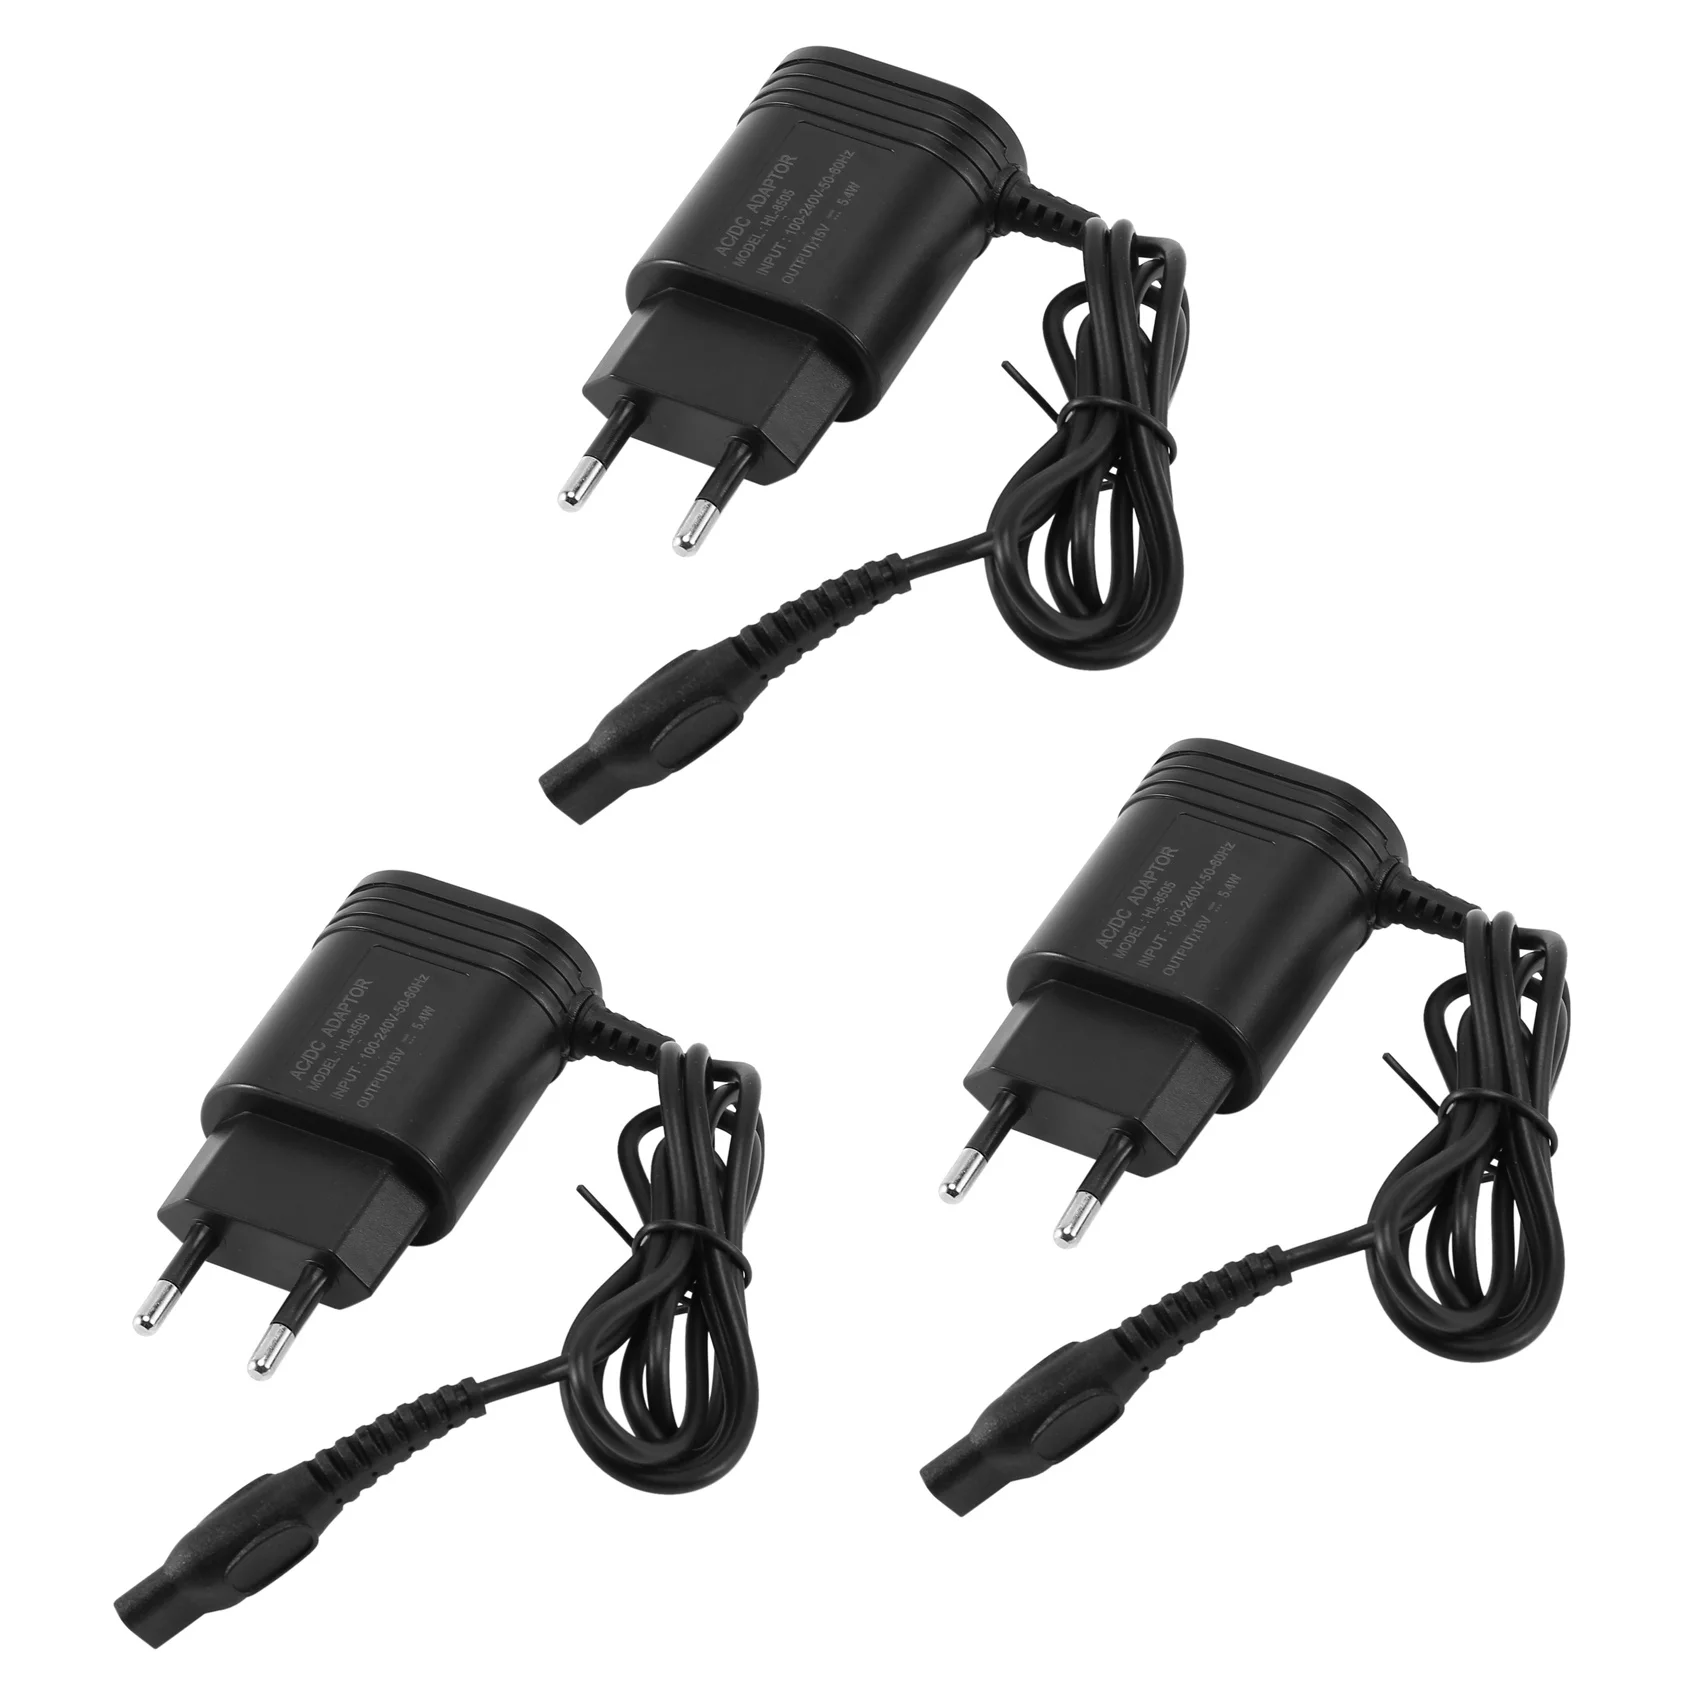 

3X Shaver for EU Wall Plug Ac Power Adapter Charger for Philips Electric Shaver Adapter for Hq8505/6070/6075(EU Plug)